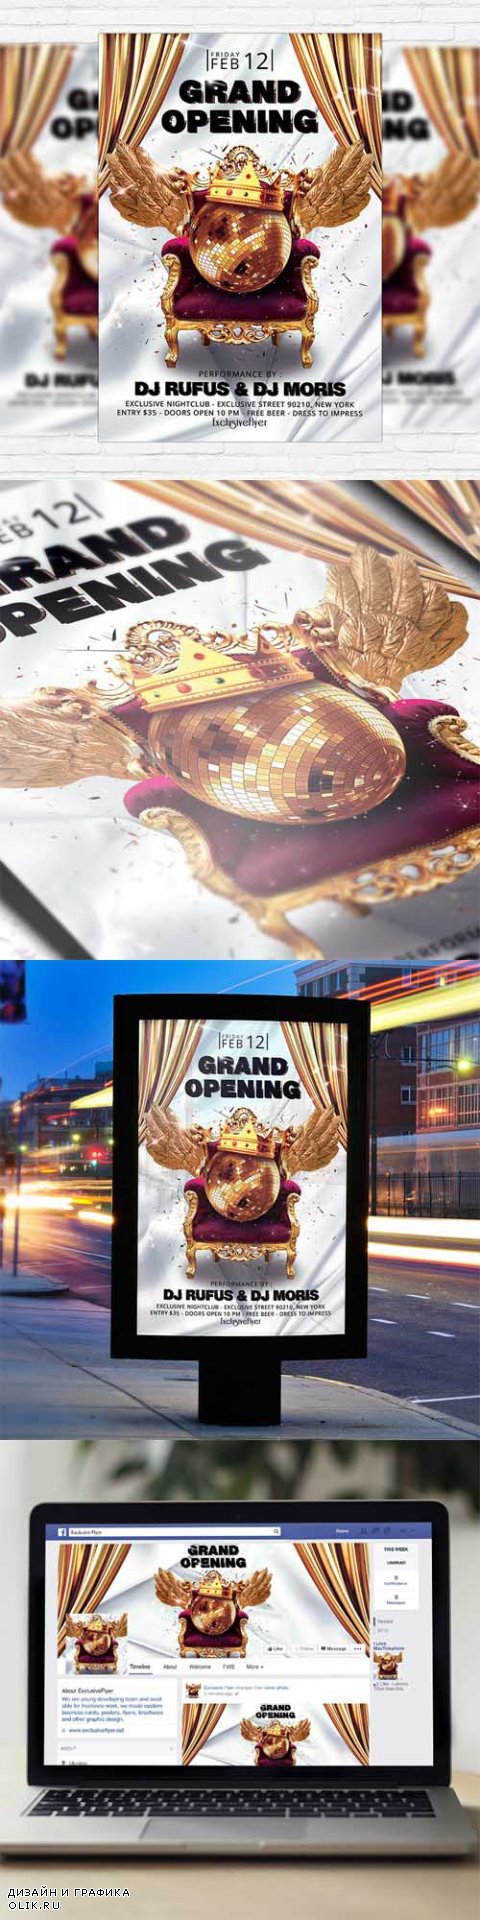 Flyer Template - Grand Opening + Facebook Cover